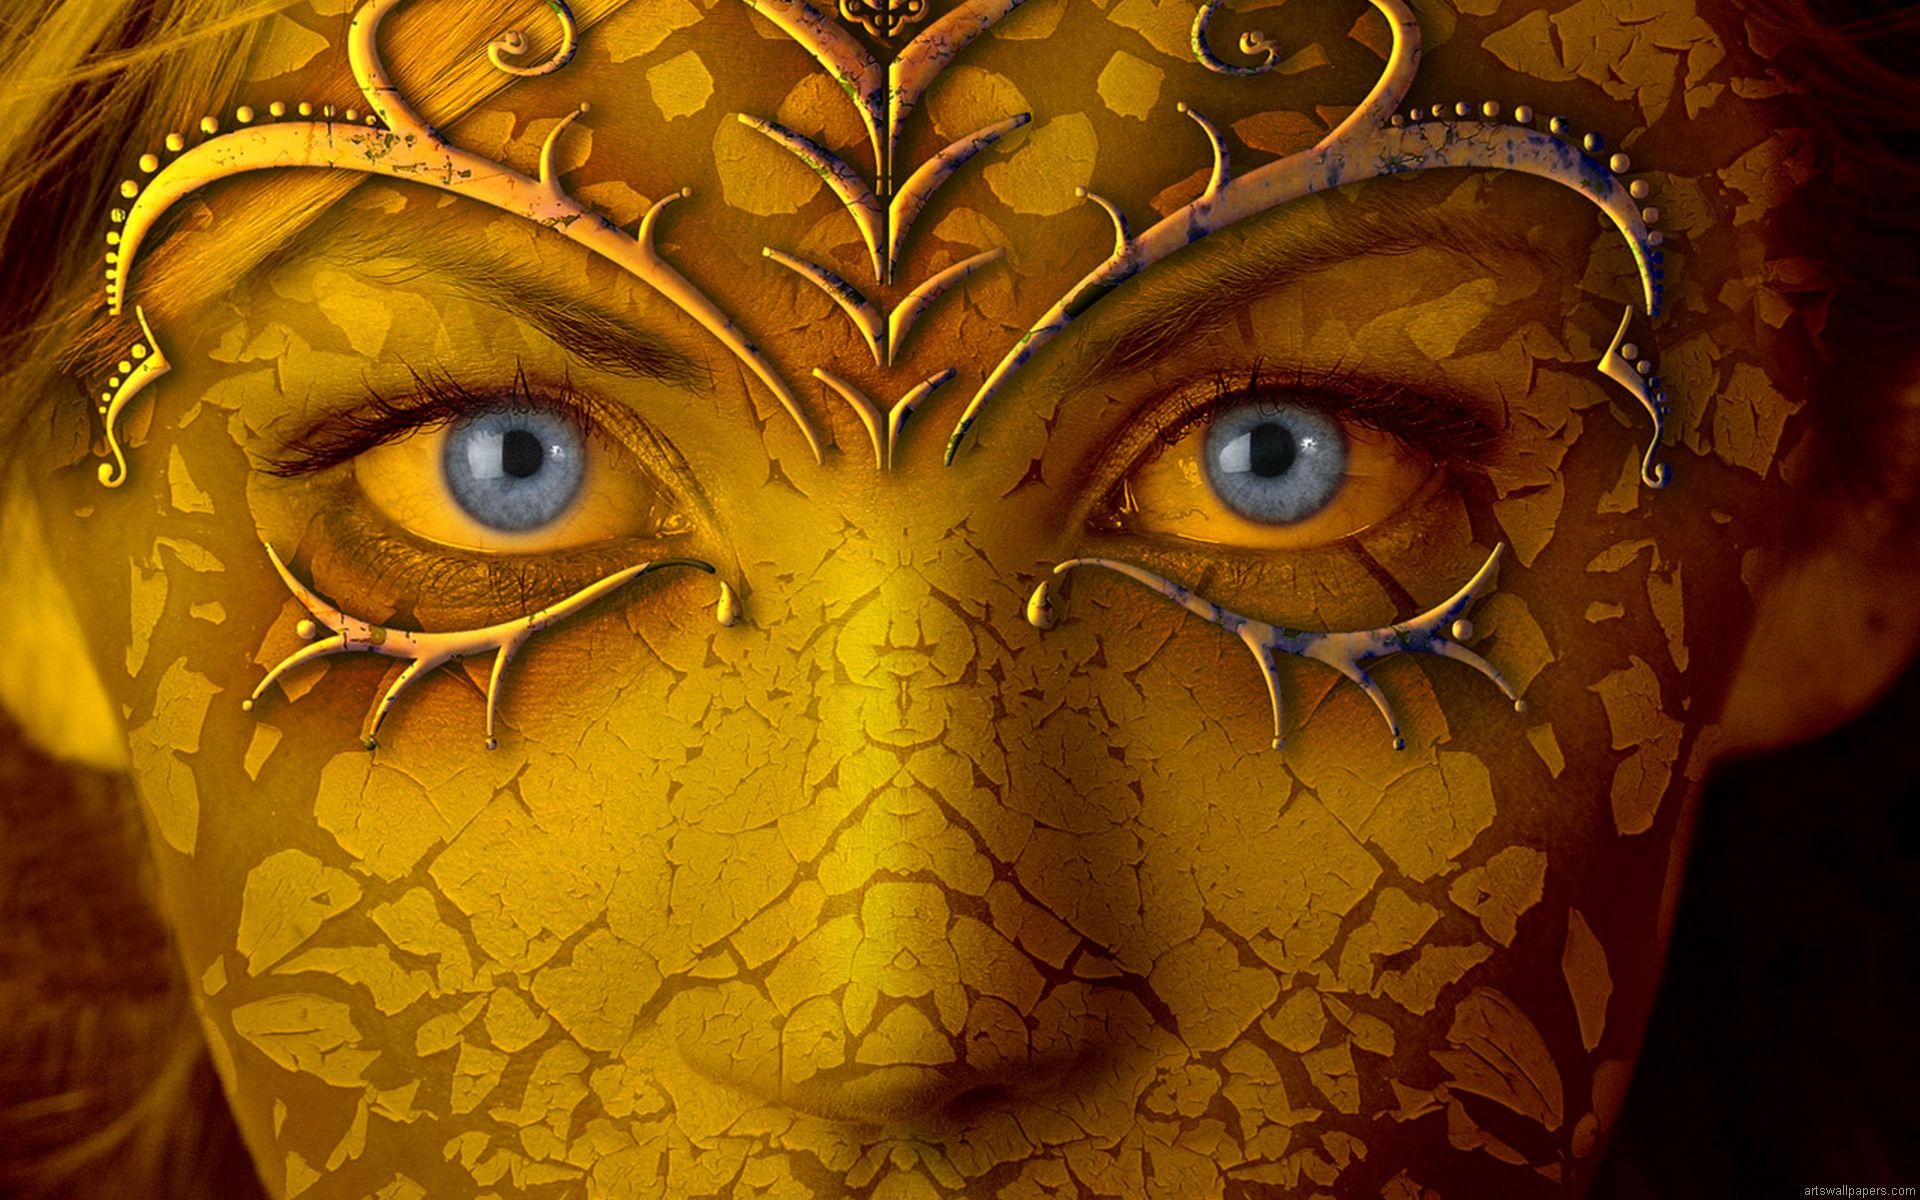 Gold Wallpapers eyes